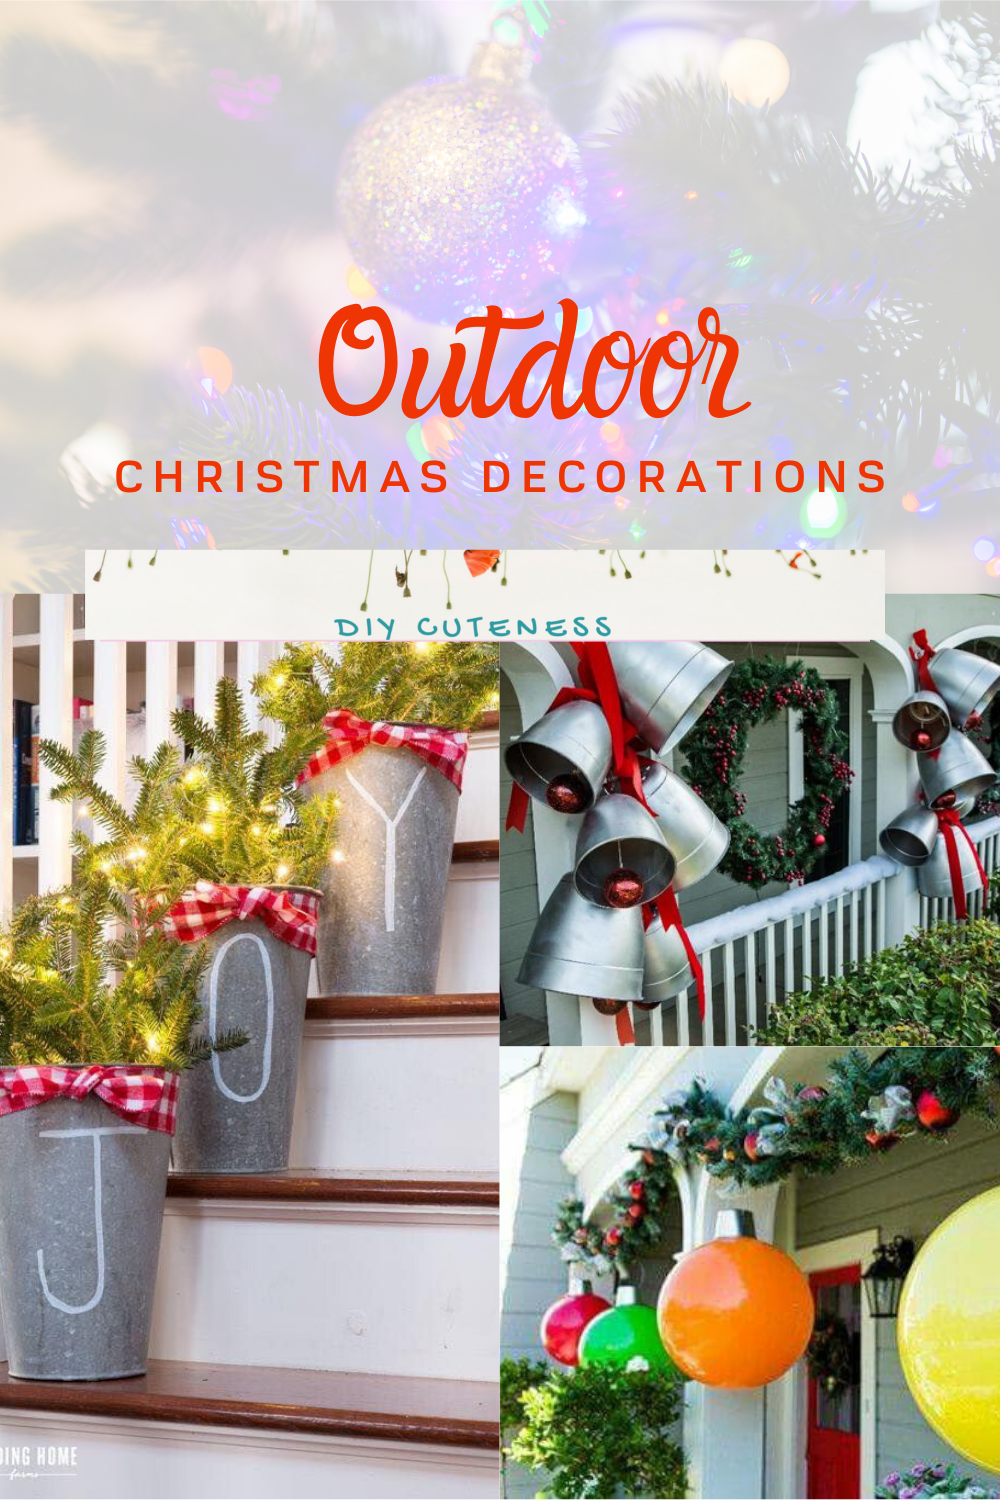 Easy Diy Christmas Decorations For Outside Diy Cuteness